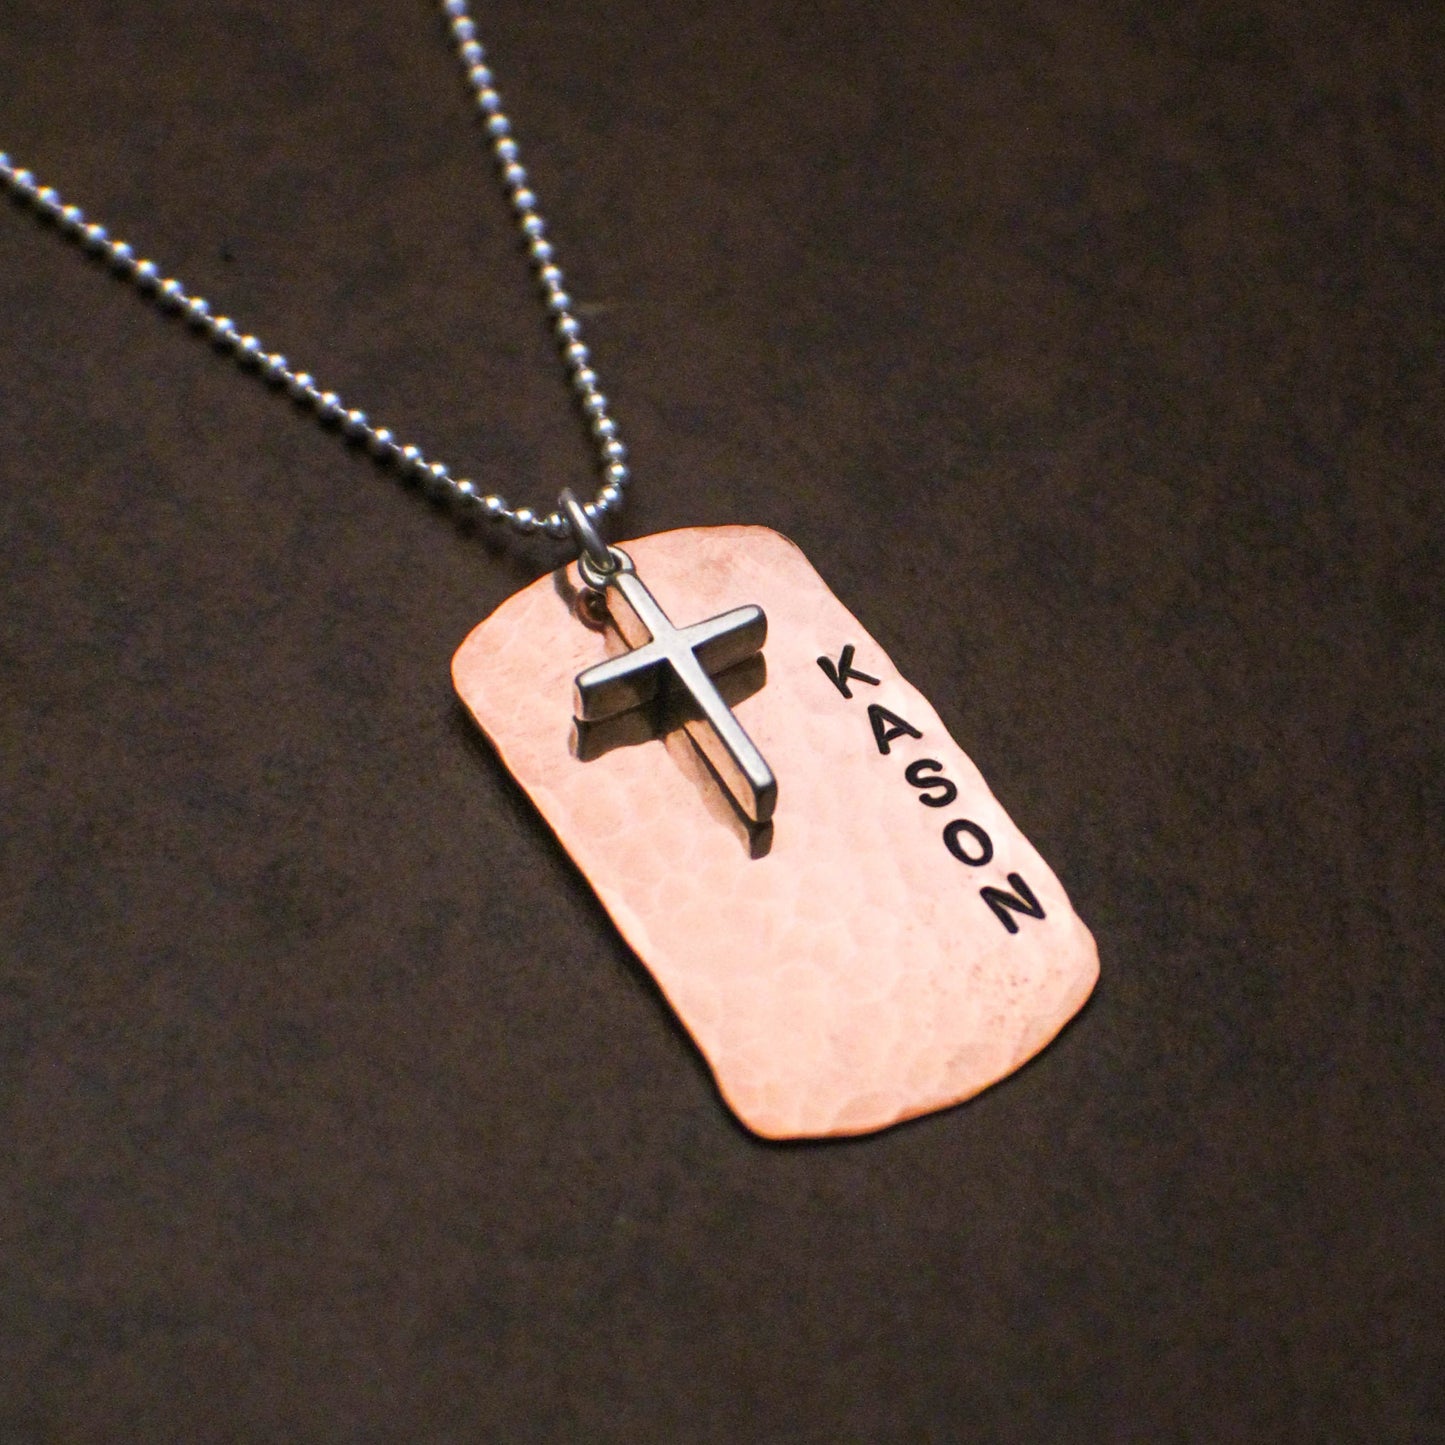 Boys Cross Necklace, Boys Confirmation or First Communion Gift, Copper Dog Tag Cross Necklace for Boys,  Hand Stamped and Personalized